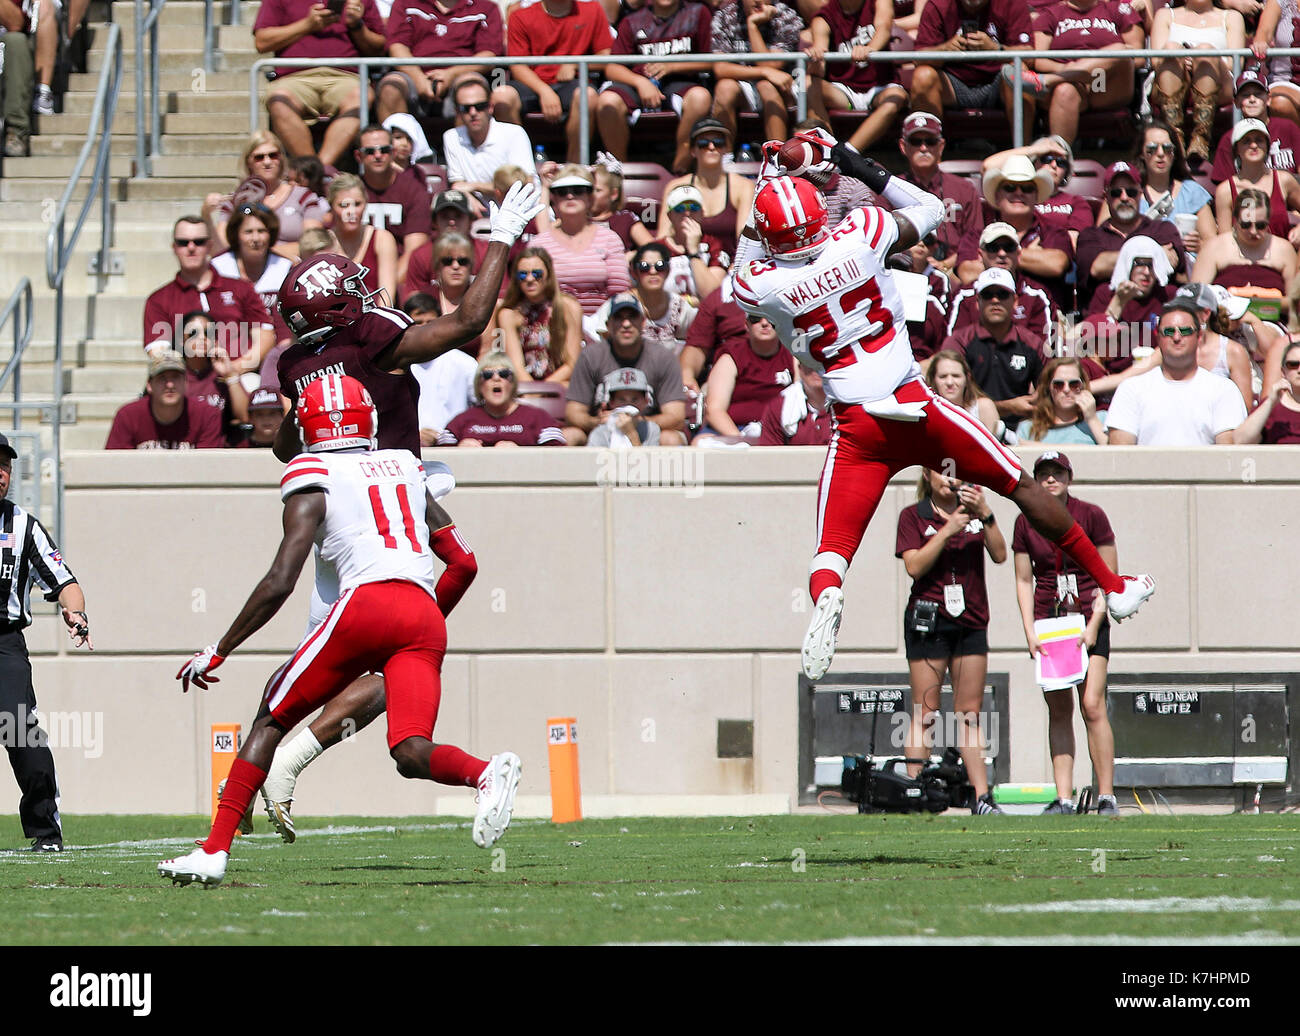 September 16, 2017: Louisiana-Lafayette Ragin Cajuns defensive back Tracy Walker (23) goes up for a interception in the second quarter during the NCAA football game between the Louisiana-Lafayette Ragin Cajuns and the Texas A&M Aggies at Kyle Field in College Station, TX; John Glaser/CSM. Stock Photo